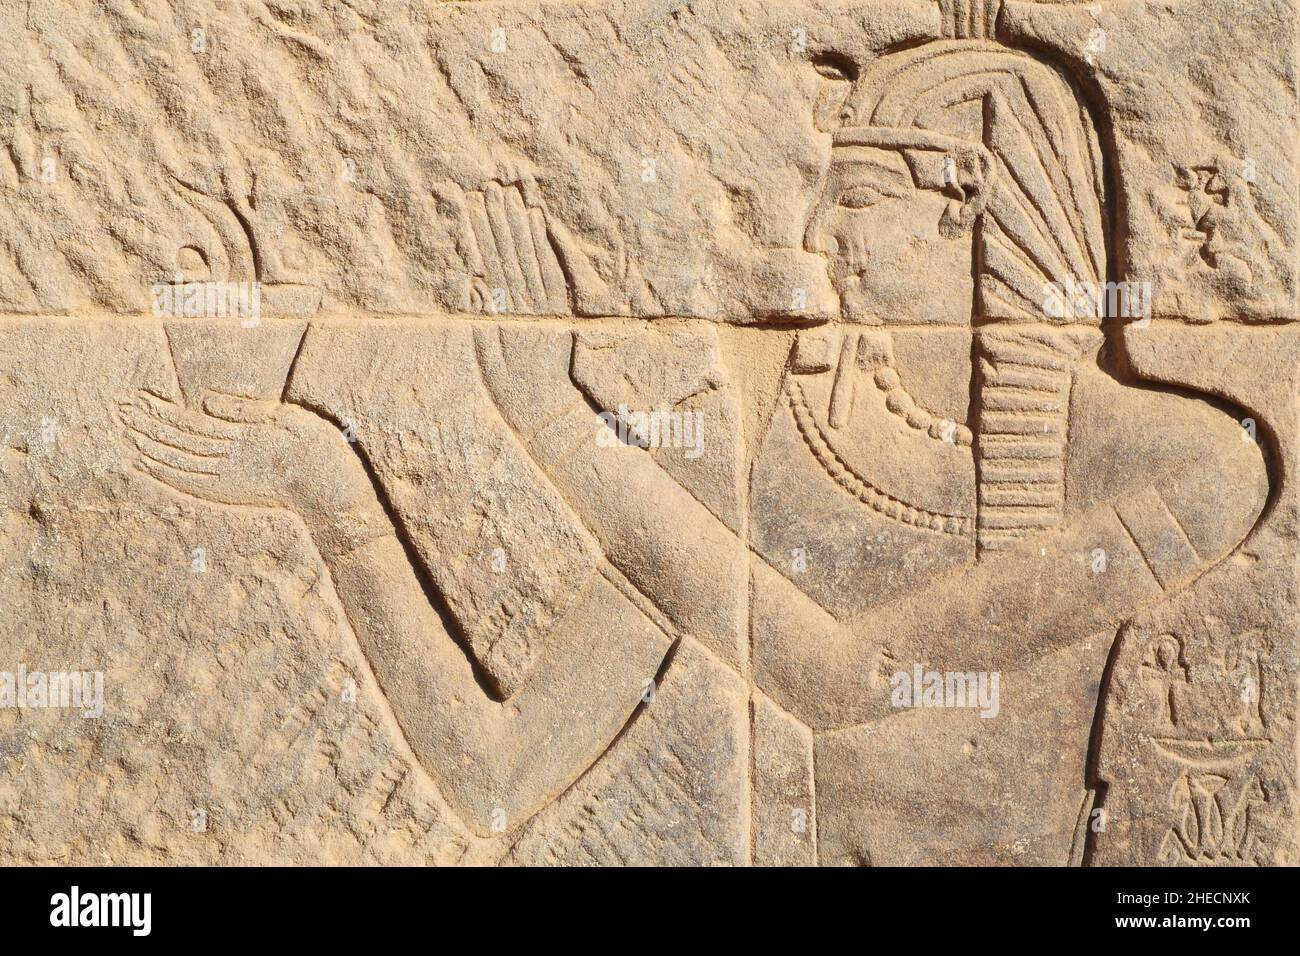 Egypt, Upper Egypt, Nubia, Nile valley, Aswan, Agilka island, temple of Philae listed as World Heritage by UNESCO, bas-relief representing a pharaoh with his false beard making an offering Stock Photo